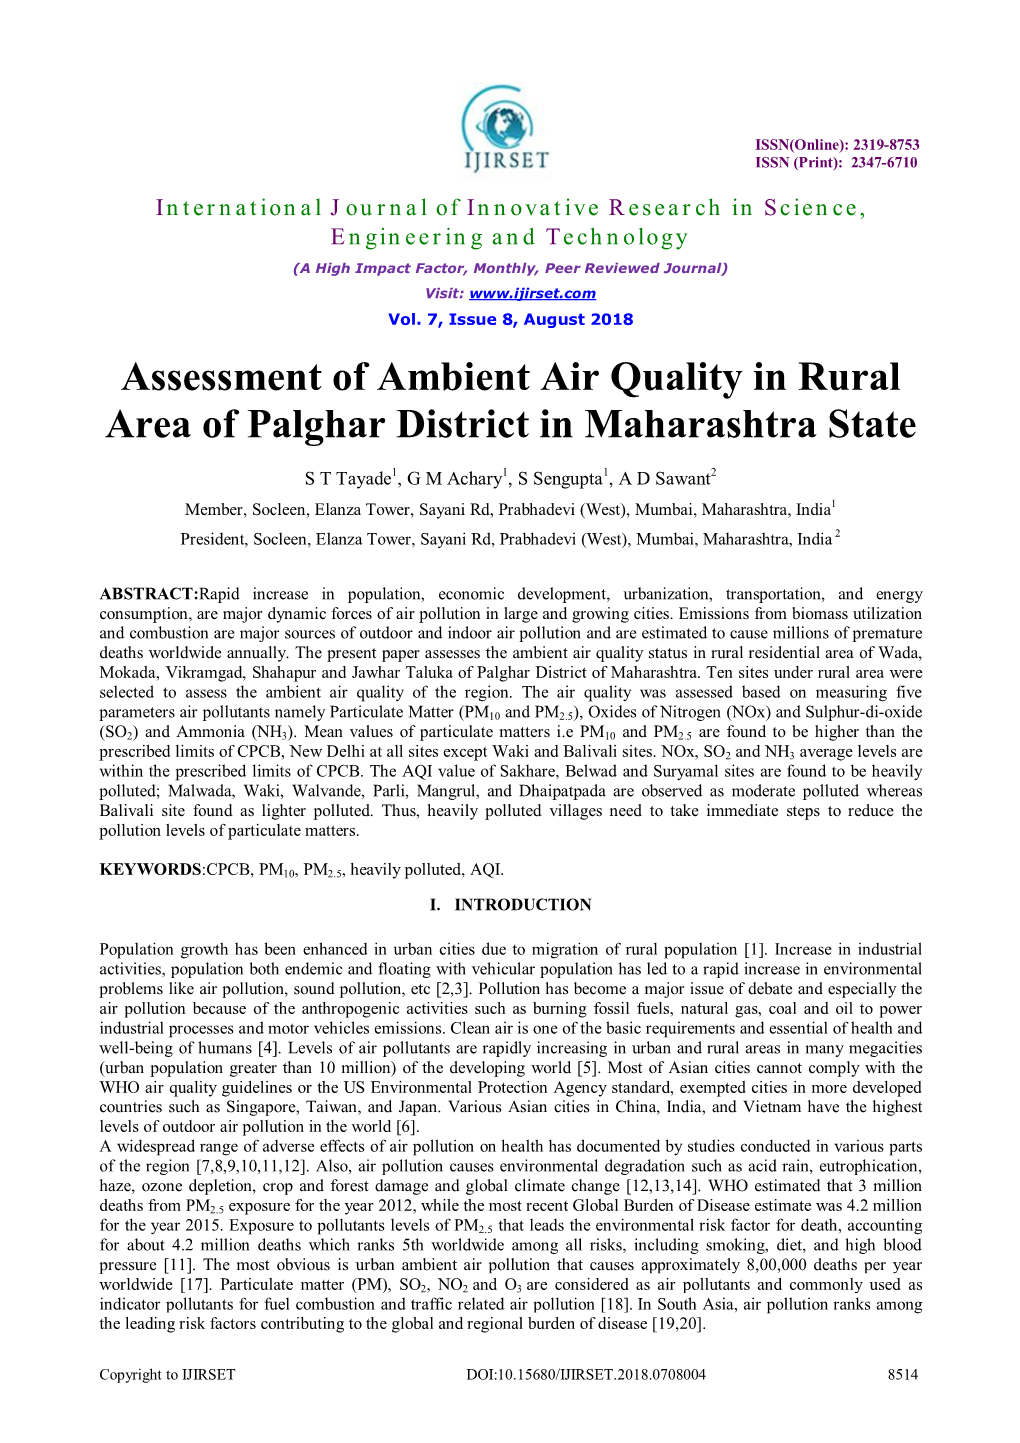 Assessment of Ambient Air Quality in Rural Area of Palghar District in Maharashtra State